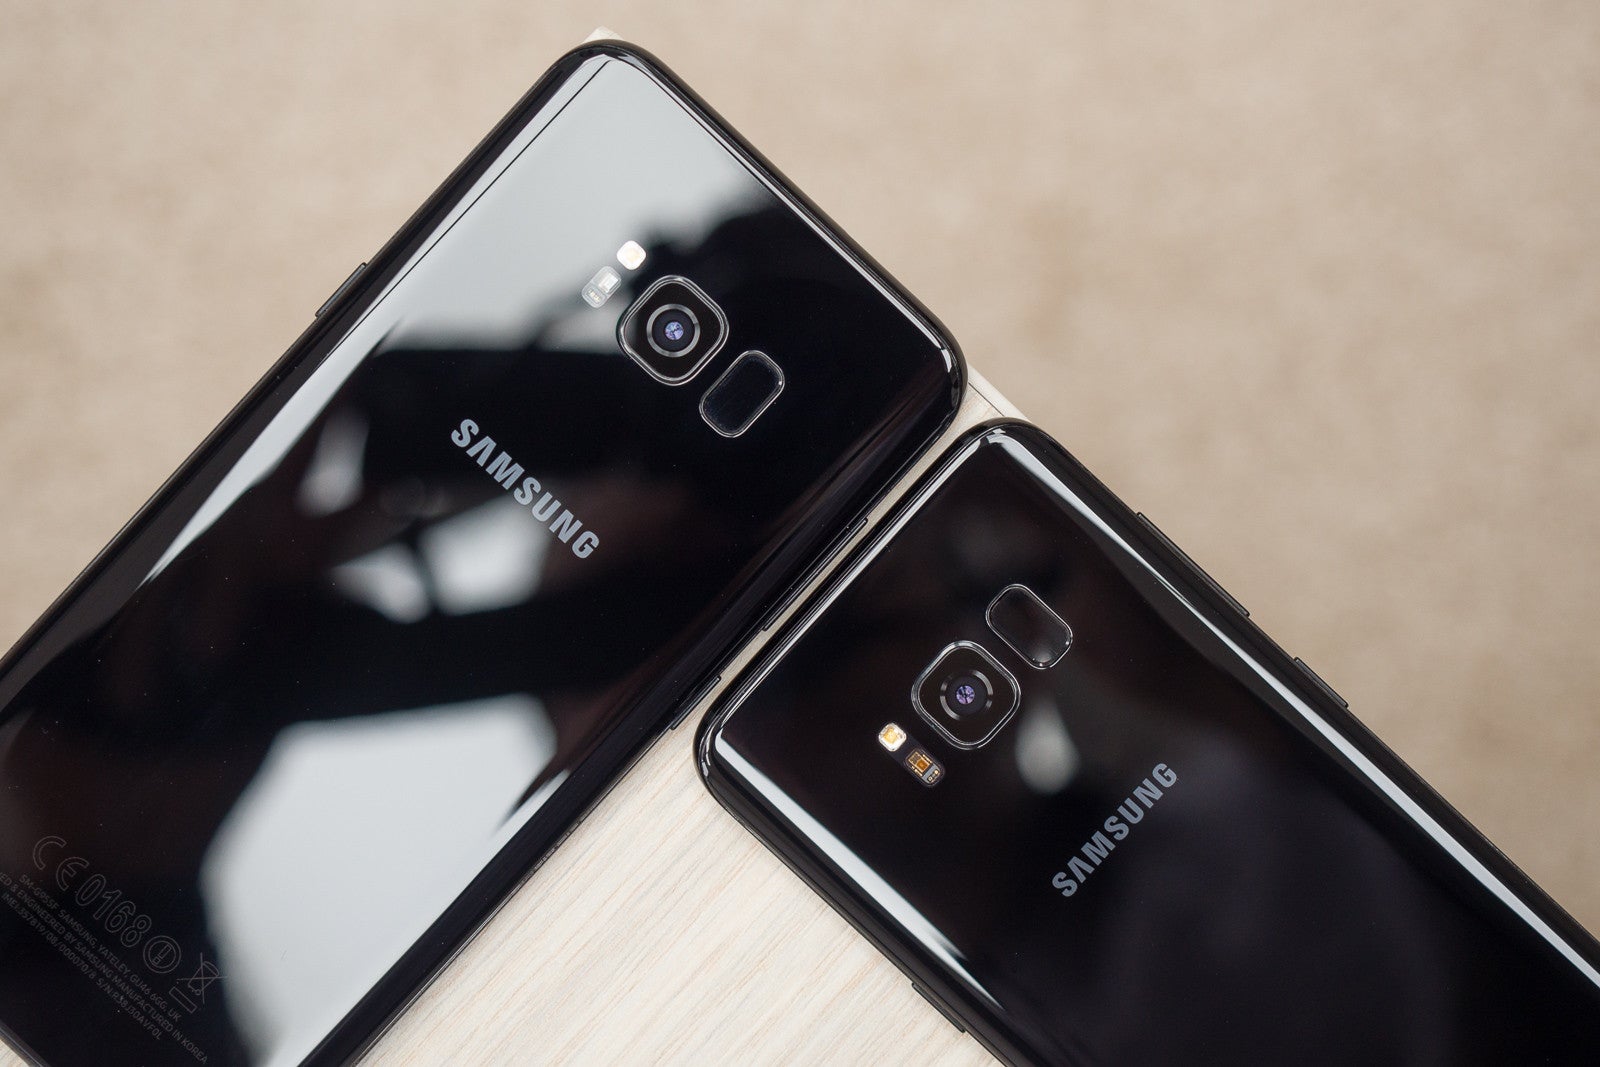 Samsung starts rolling out software update for Galaxy S8 that fixes red tint issue